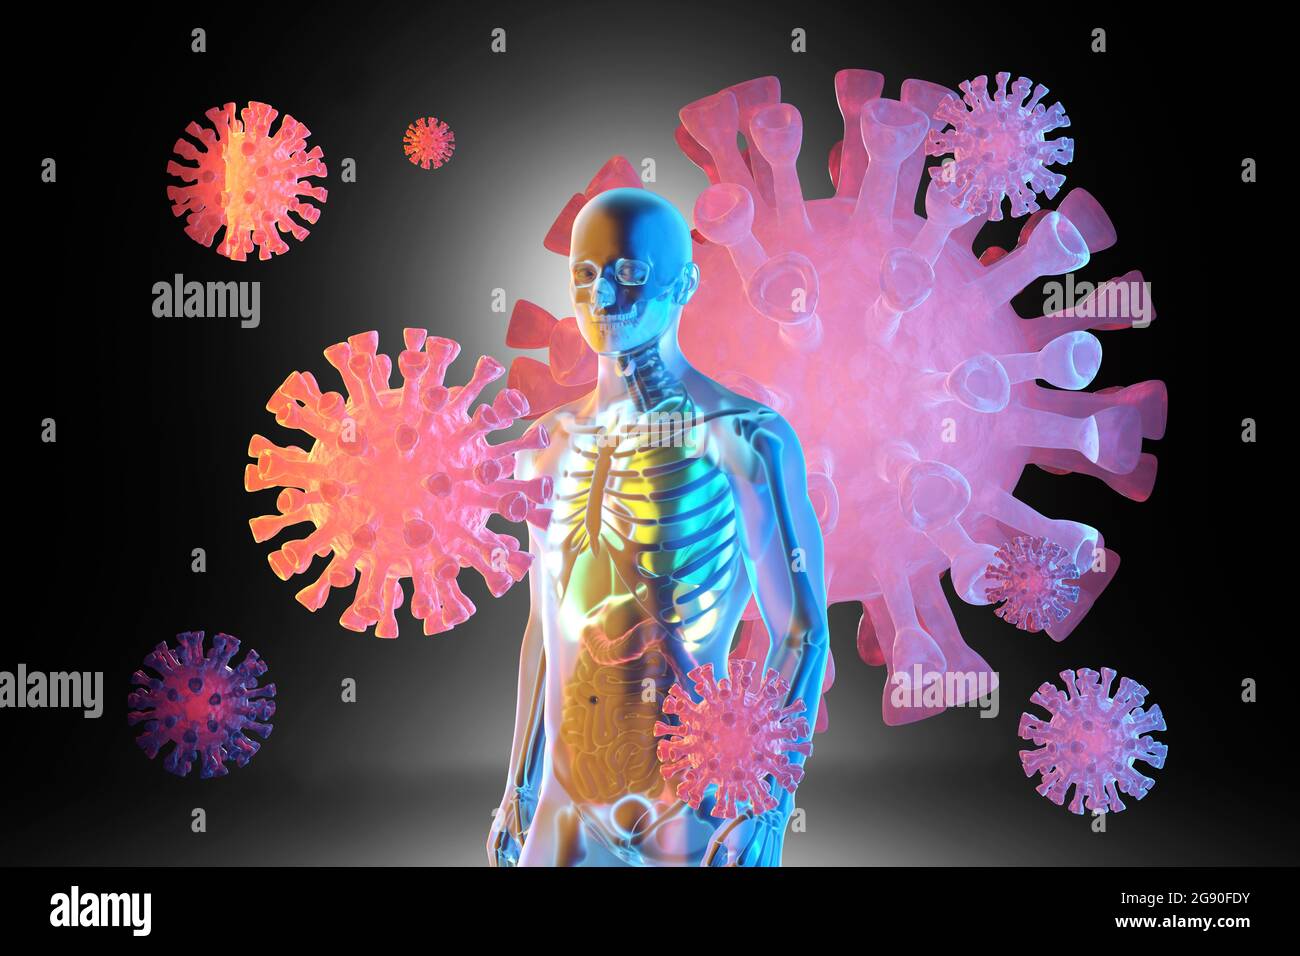 Three dimensional render of giant virus cells floating around human anatomical model with transparent skin Stock Photo